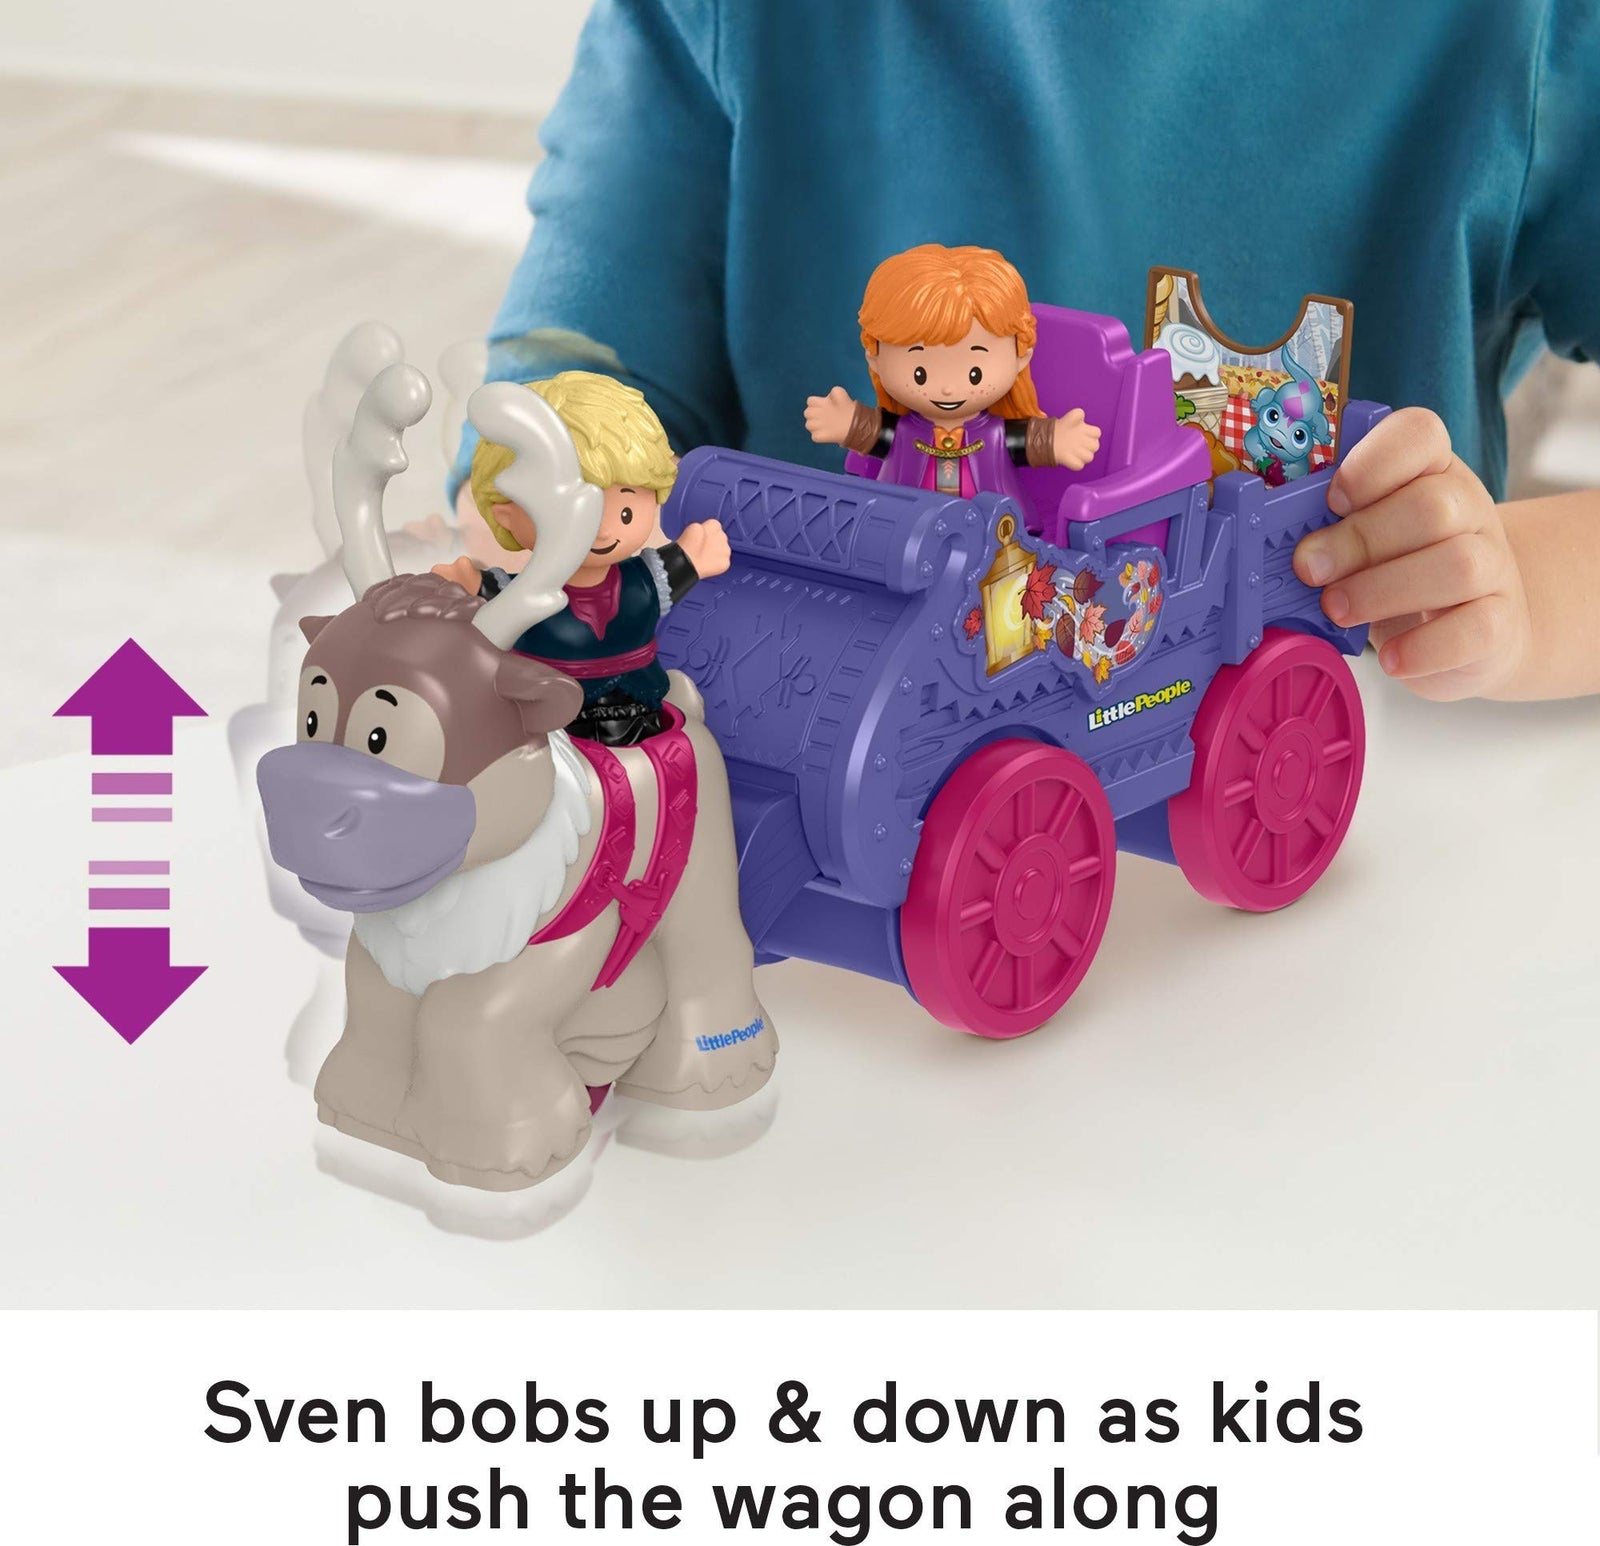 Fisher-Price Little People – Disney Frozen 2 Anna & Kristoff’s Wagon, push-along vehicle with character figures for toddlers and preschool kids